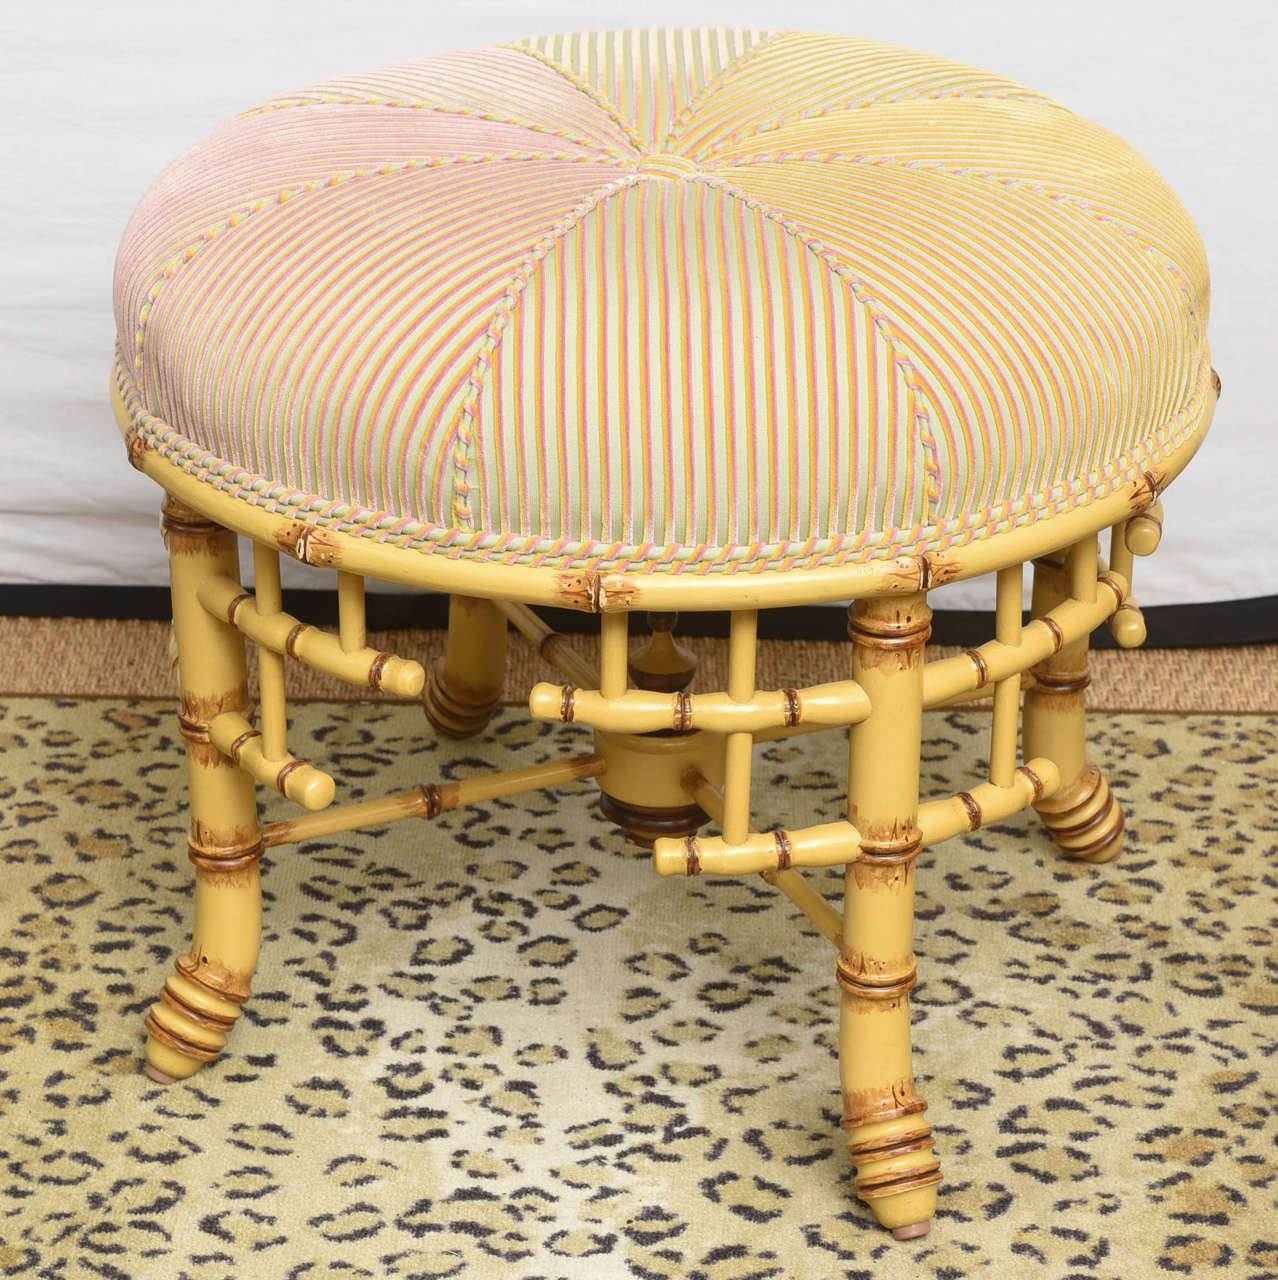 Schumacher & Co. (American (Delaware ,NYC , Contemporary), a pair of designer ottomans or stools (Brighton Round Stool-Mitered) with hand-carved European beechwood frame with simulated or faux bamboo motif. Wood frame in similar style to R.J.